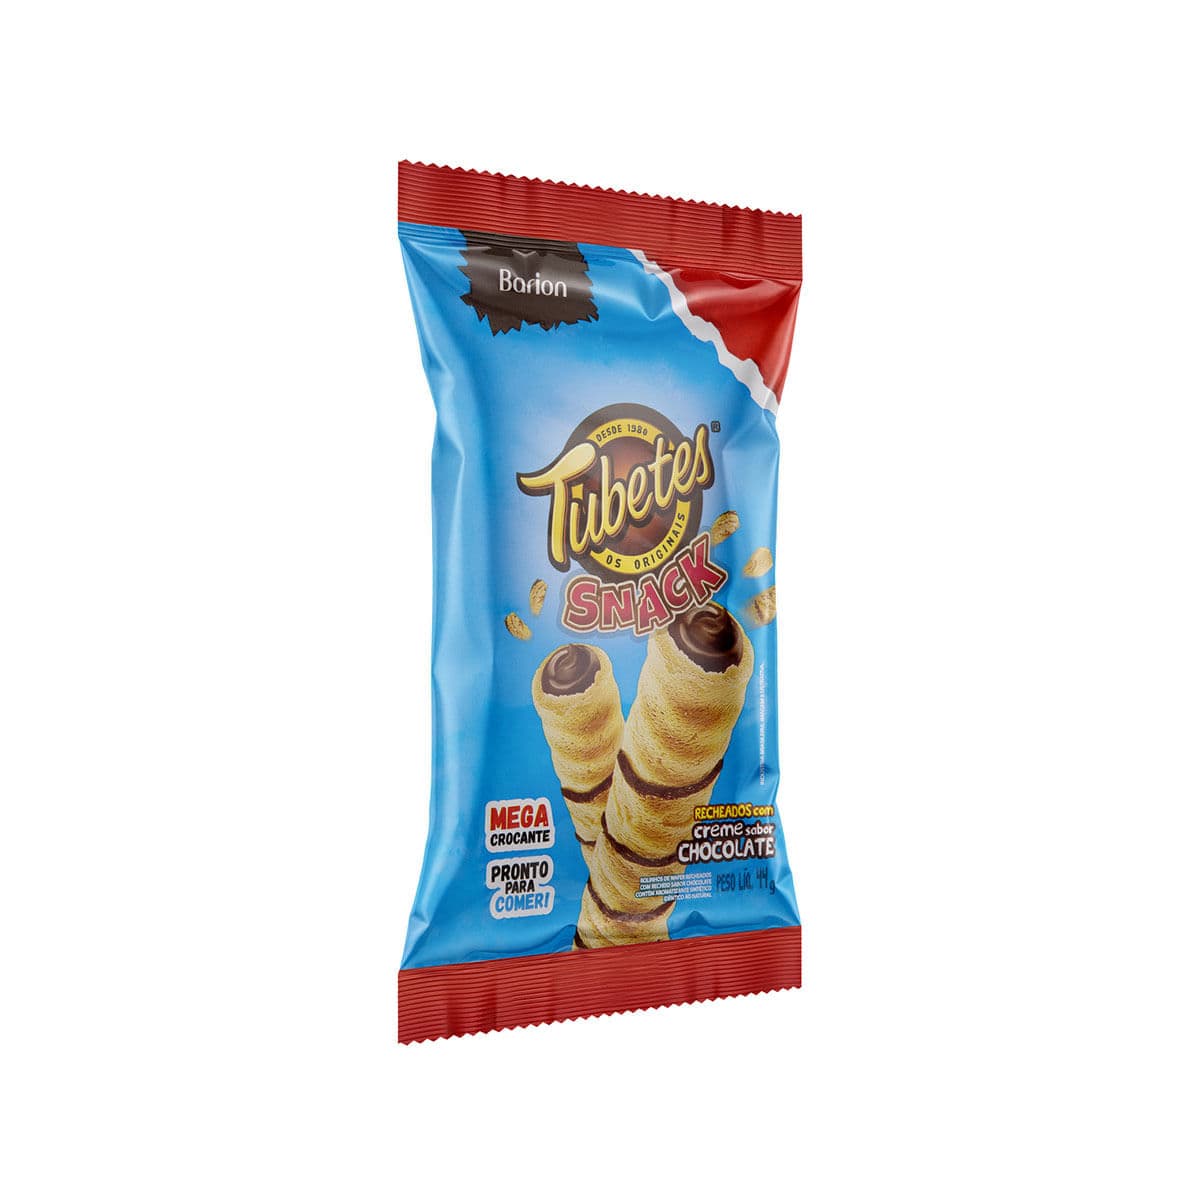 Tubetes® Snack - Chocolate 44 g - Barion